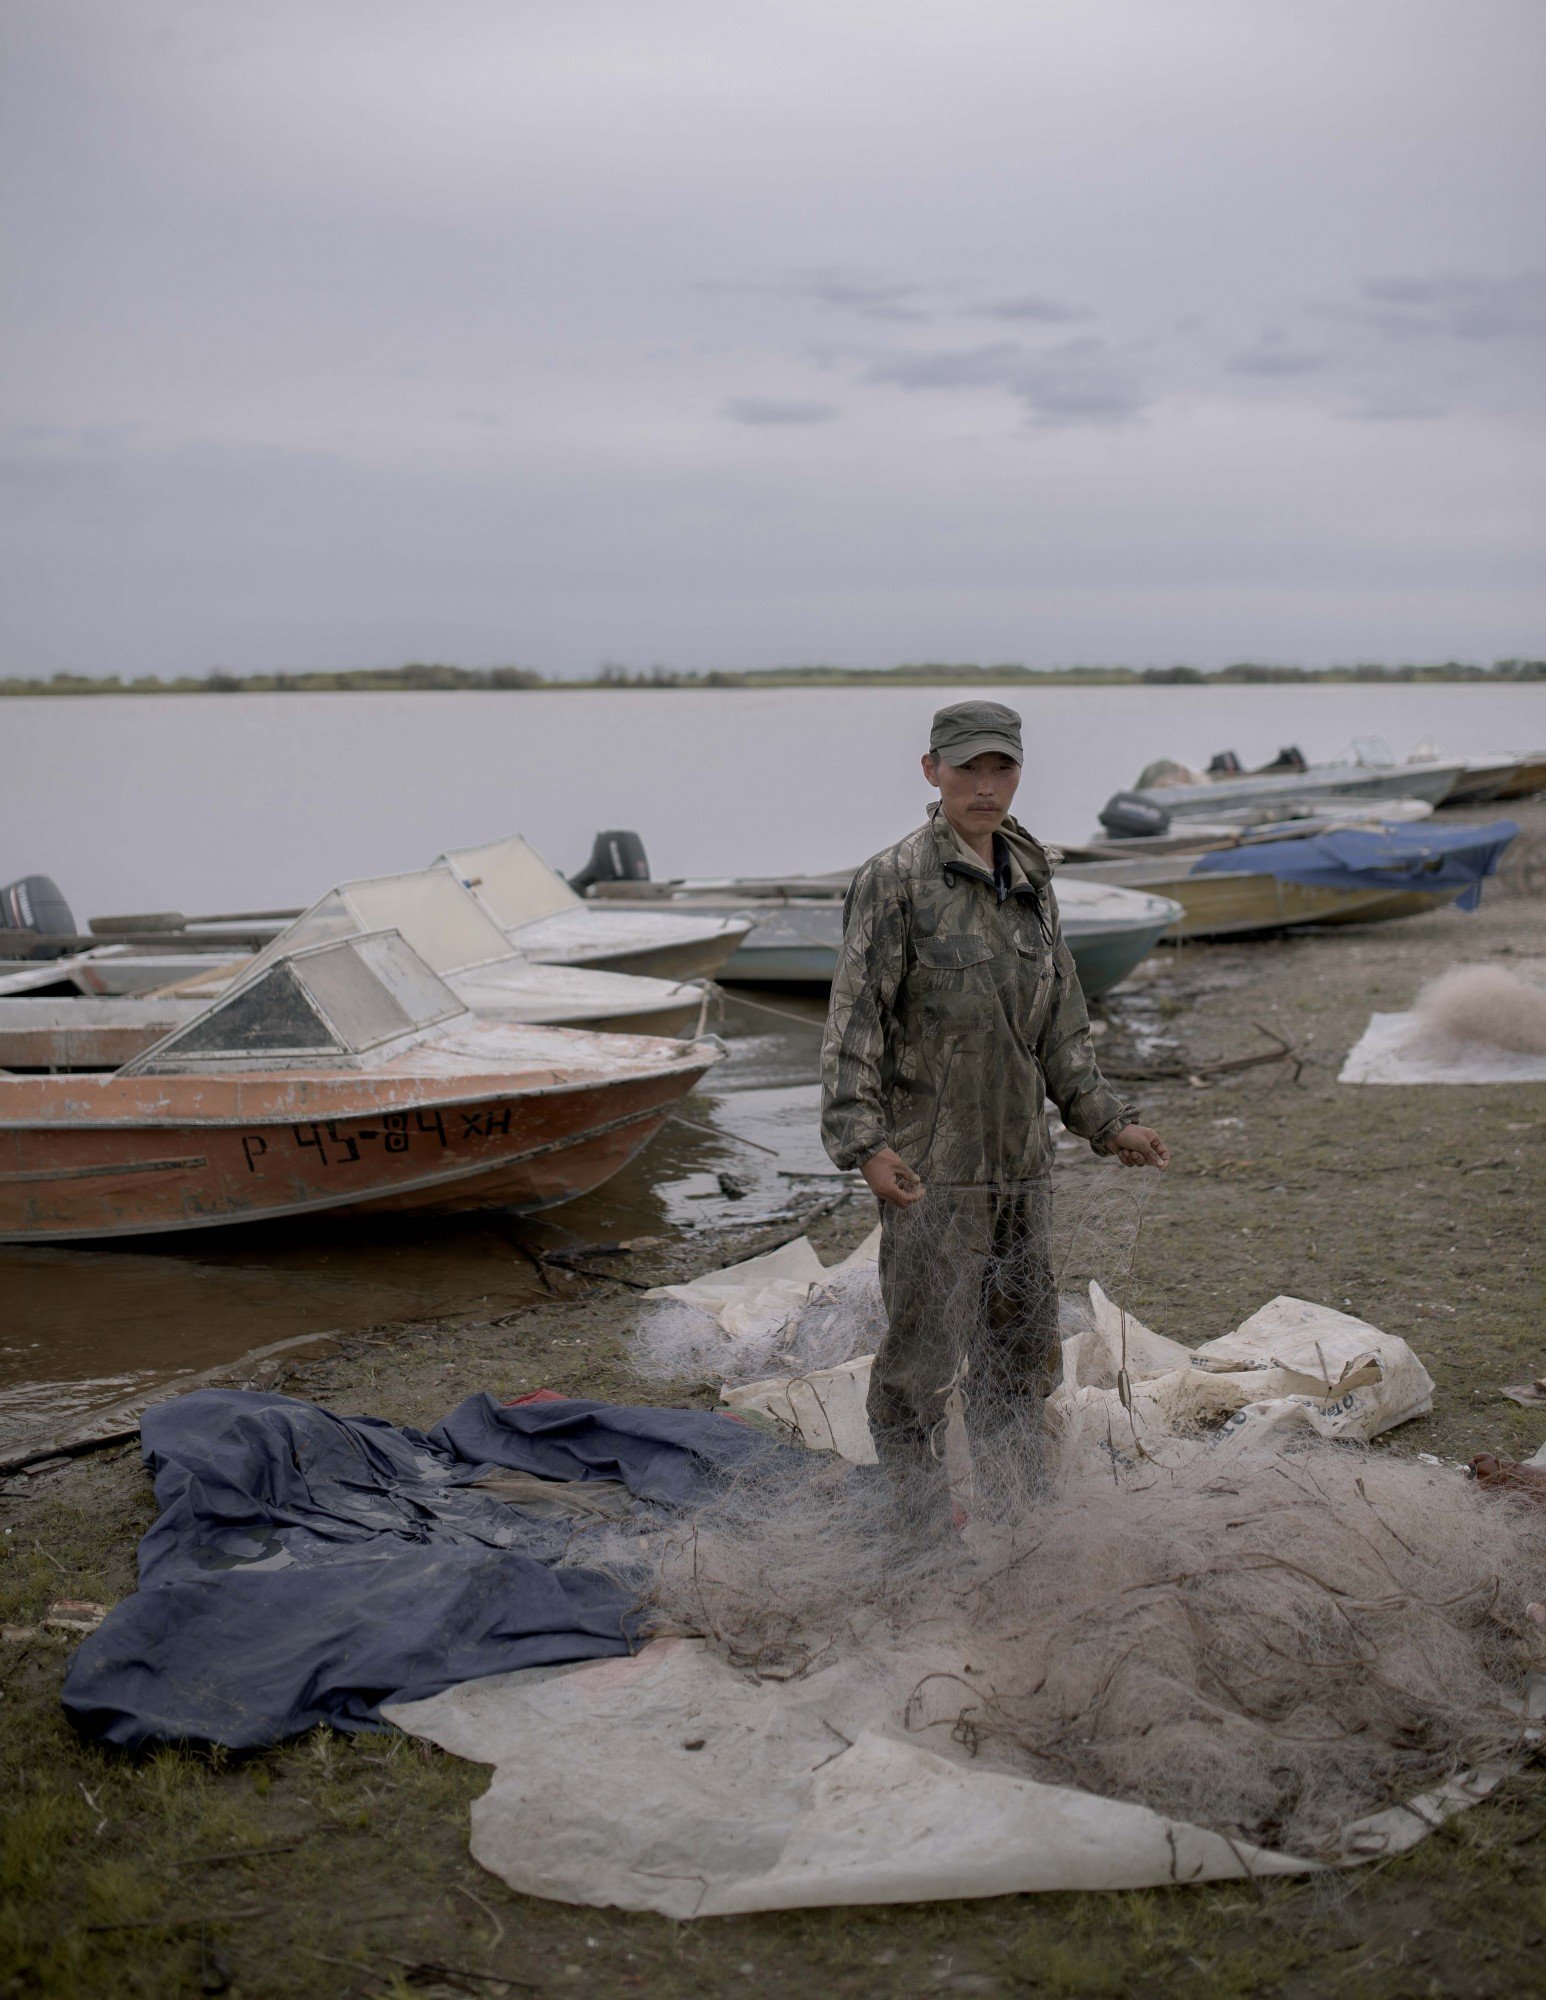  Locals are worried that fish have become scarce over the last few years. Many are outraged that this is happening as a result of exploitative fishing methods used by larger enterprises on the Amur River